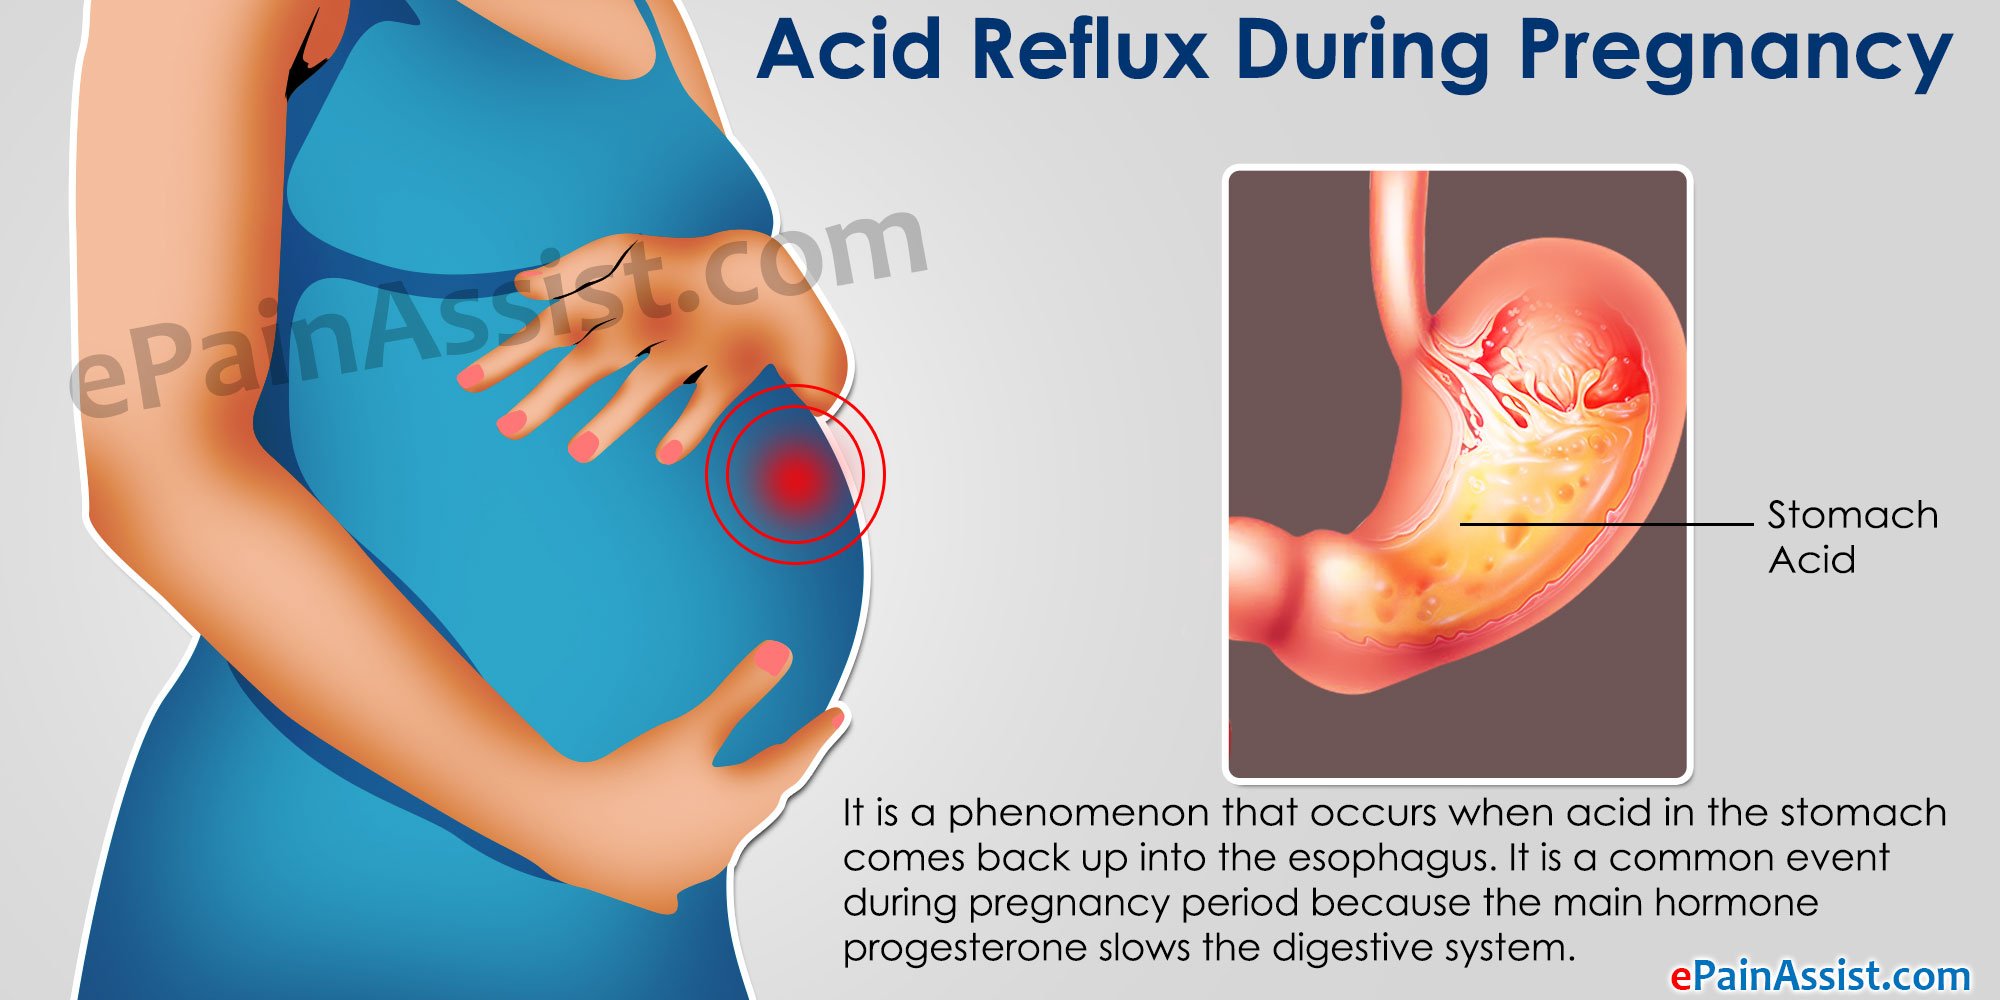 Acid Reflux During Pregnancy: Home Remedies and Lifestyle Changes